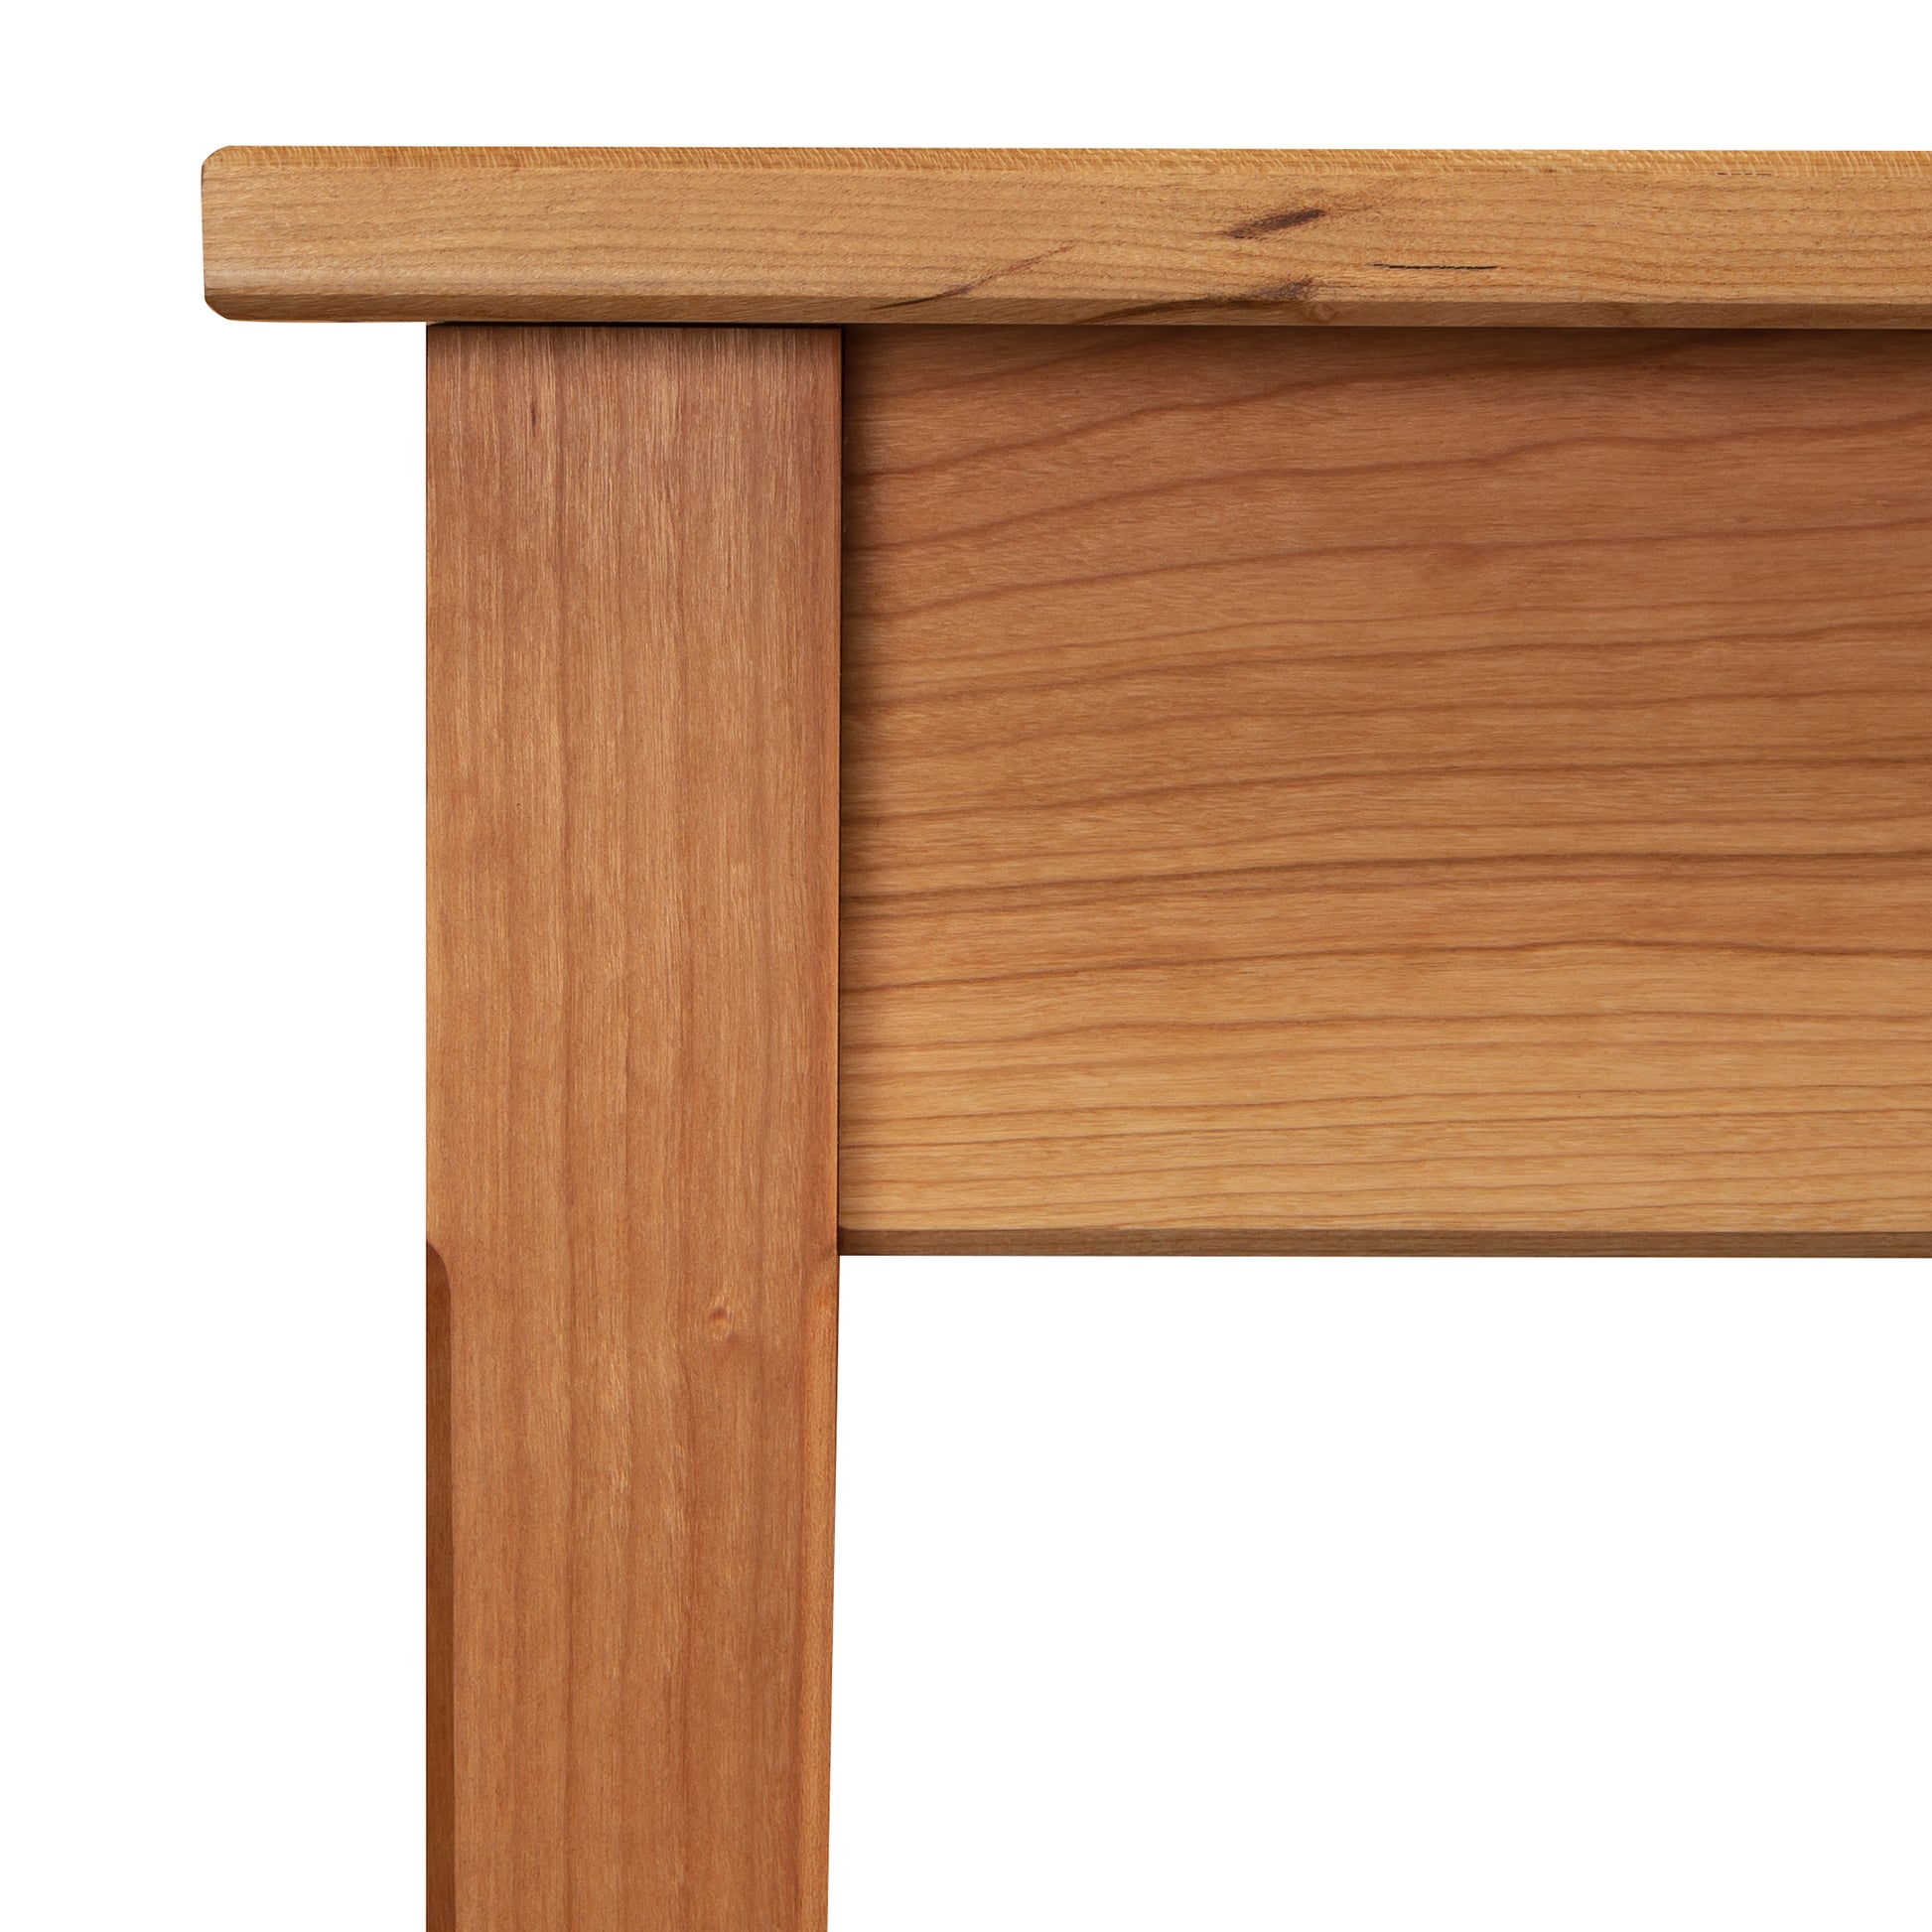 A Maple Corner Woodworks Vermont Shaker Writing Desk corner with a solid wood construction leg and a flat surface, showcasing the wood grain and joints, on a white background.